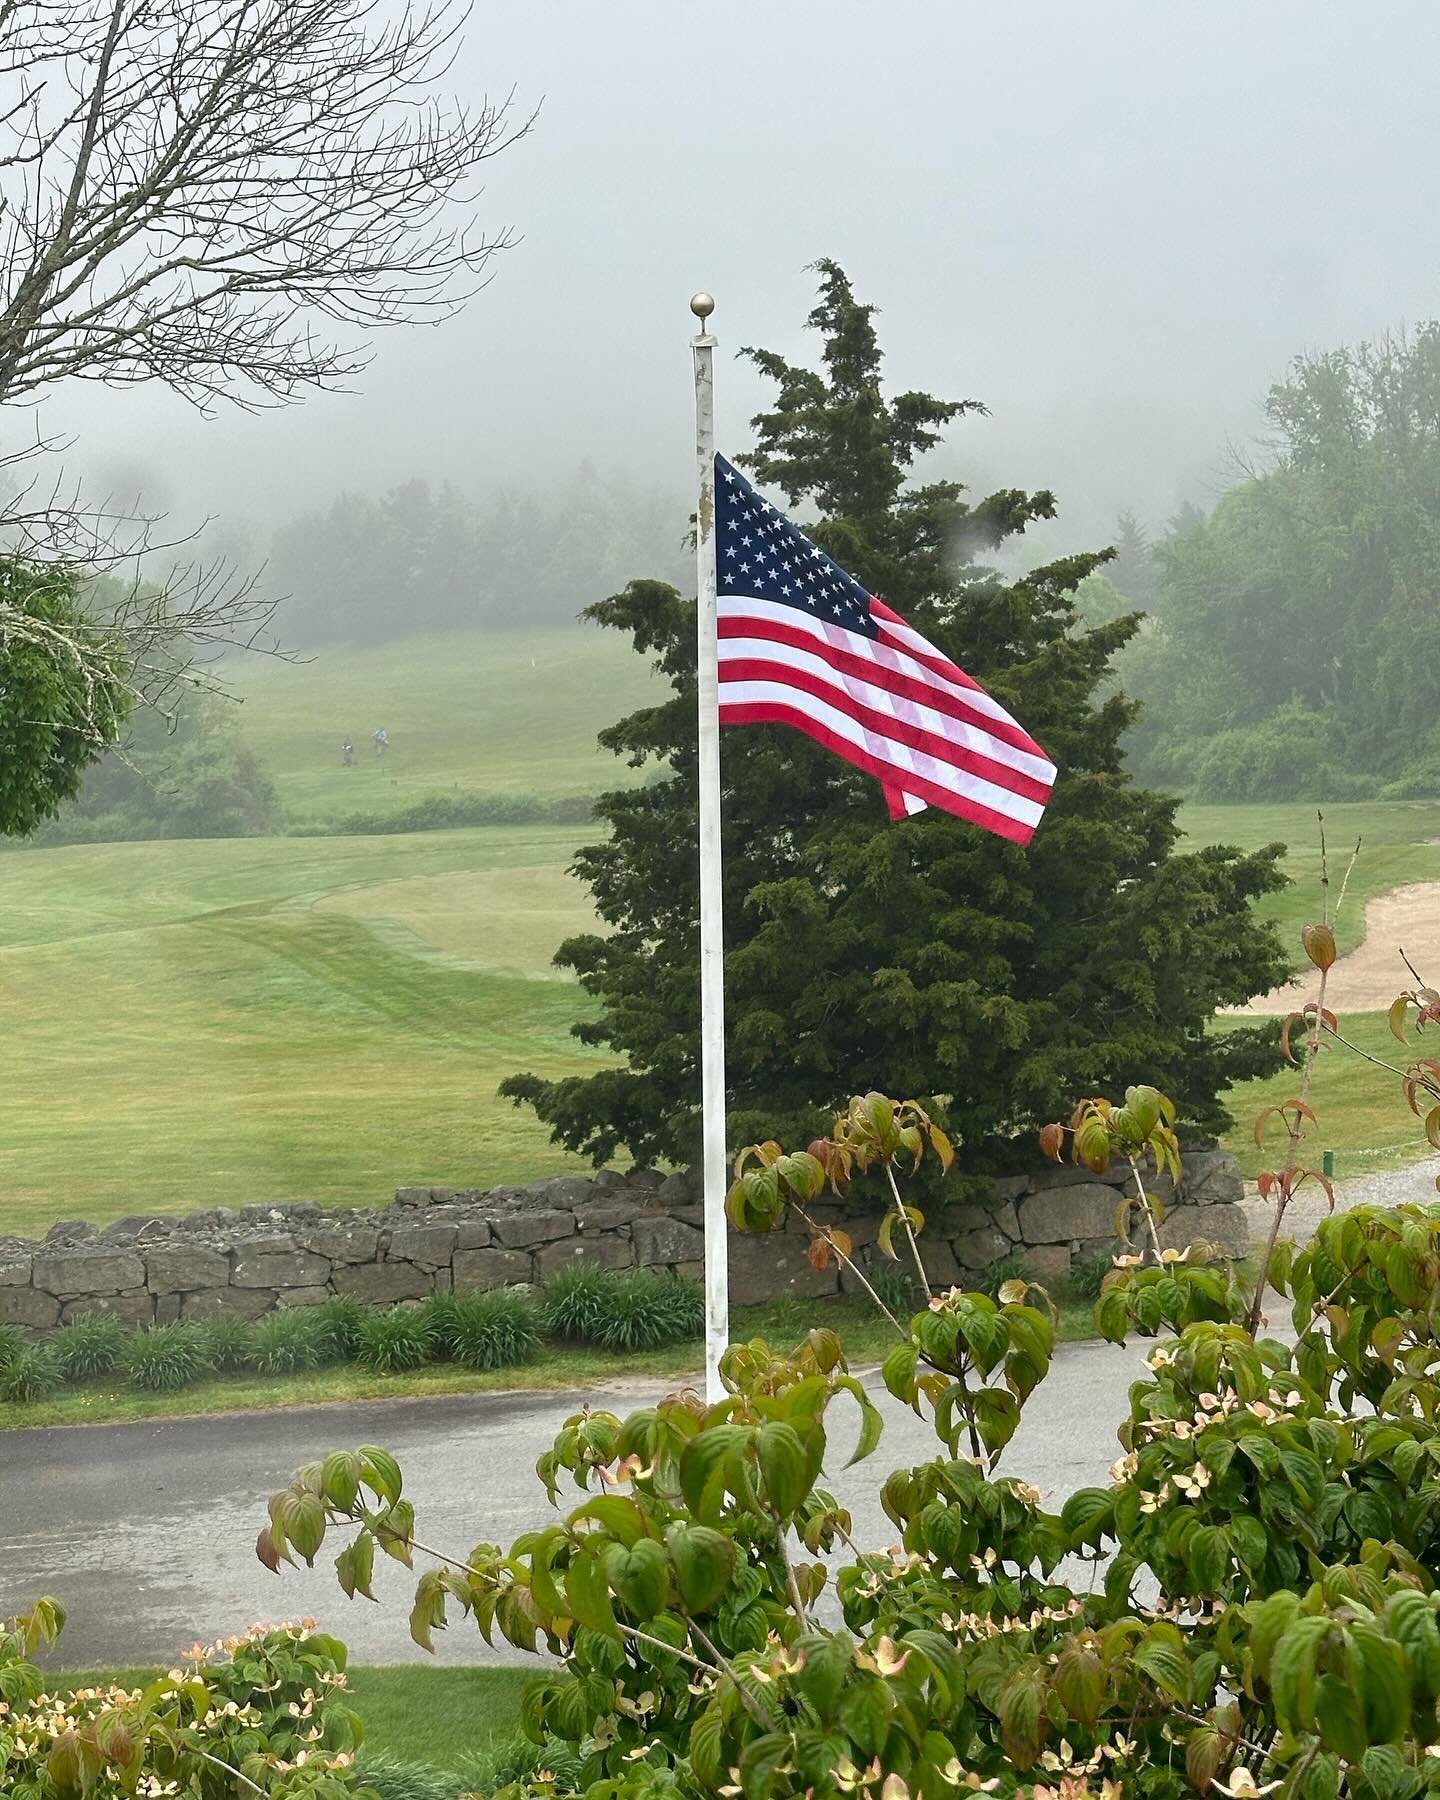 Today we remember all of those who gave the ultimate sacrifice for our country. 🇺🇸 Thank you for your service.

Despite the misty fog our tee sheet looks pretty packed this morning! 

Please note: Our restaurant closes at 3pm today so our staff can